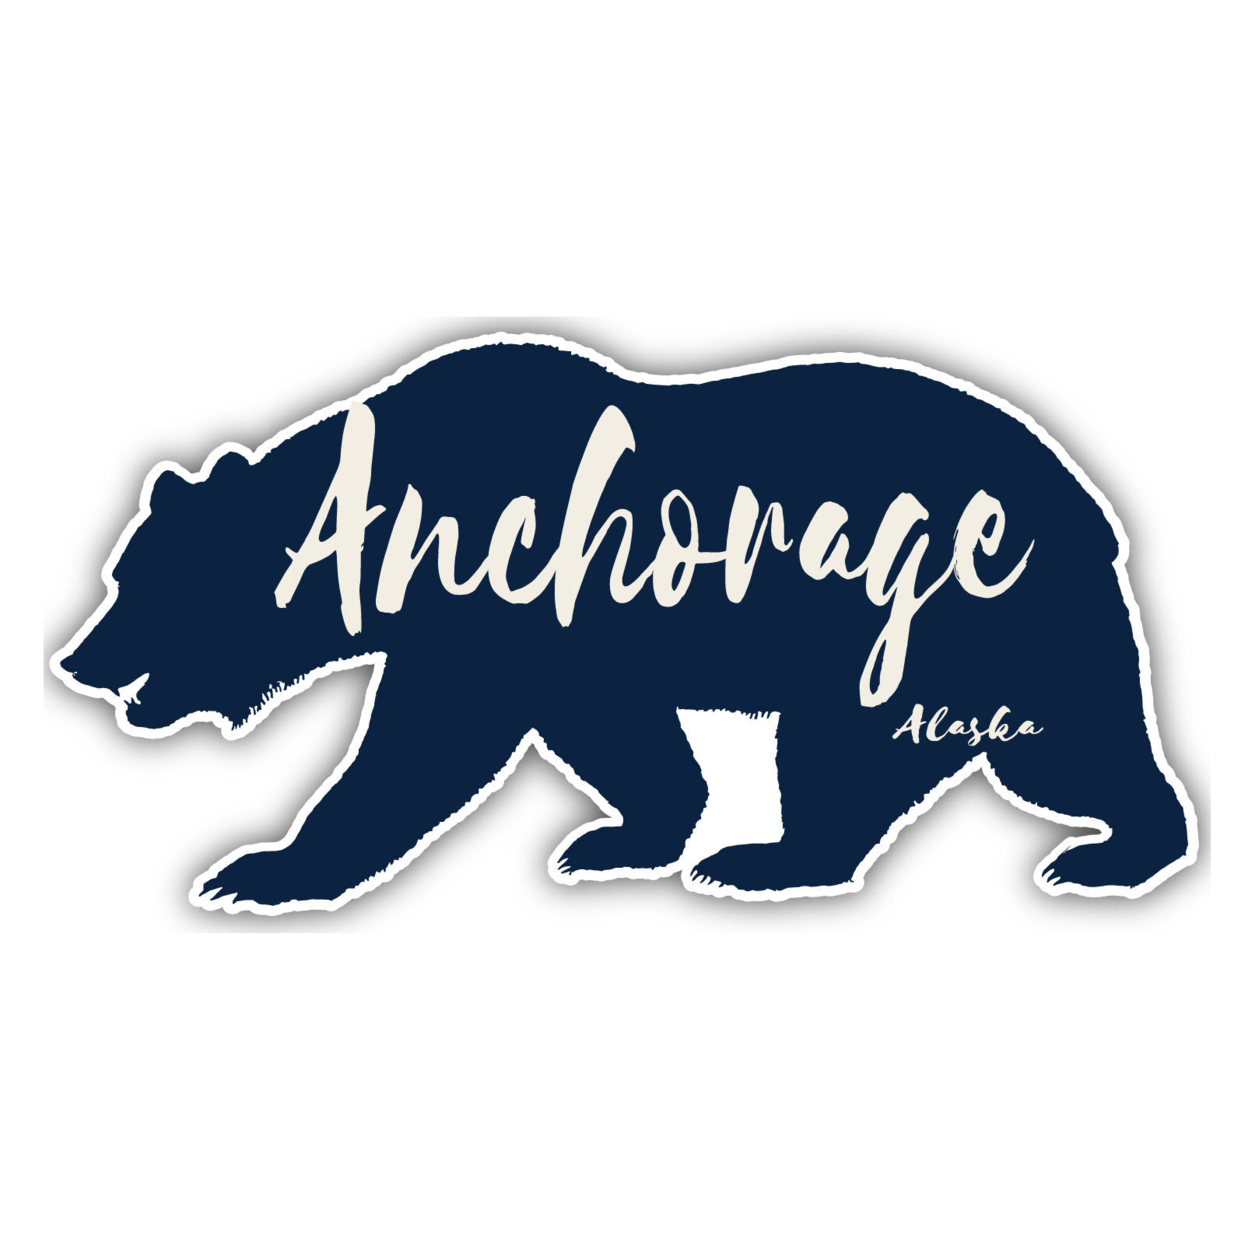 Anchorage Alaska Souvenir Decorative Stickers (Choose Theme And Size) - 4-Pack, 4-Inch, Great Outdoors